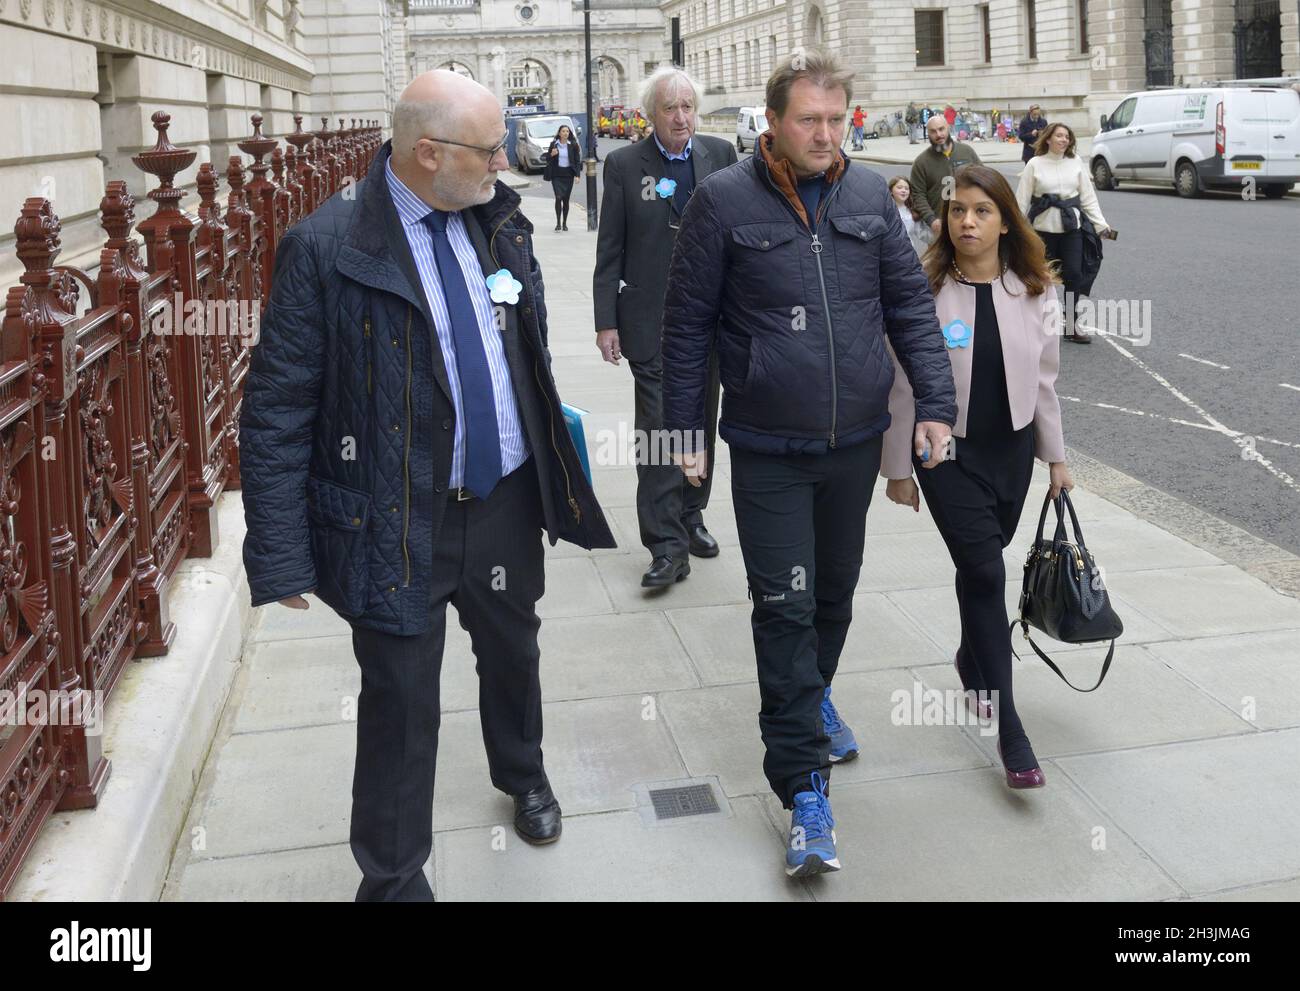 Richard Ratcliffe - husband of Nazanin Zaghari-Ratcliffe, detained in Iran - on his way to meet with Foreign Secretary Liz Truss on the fifth day of h Stock Photo